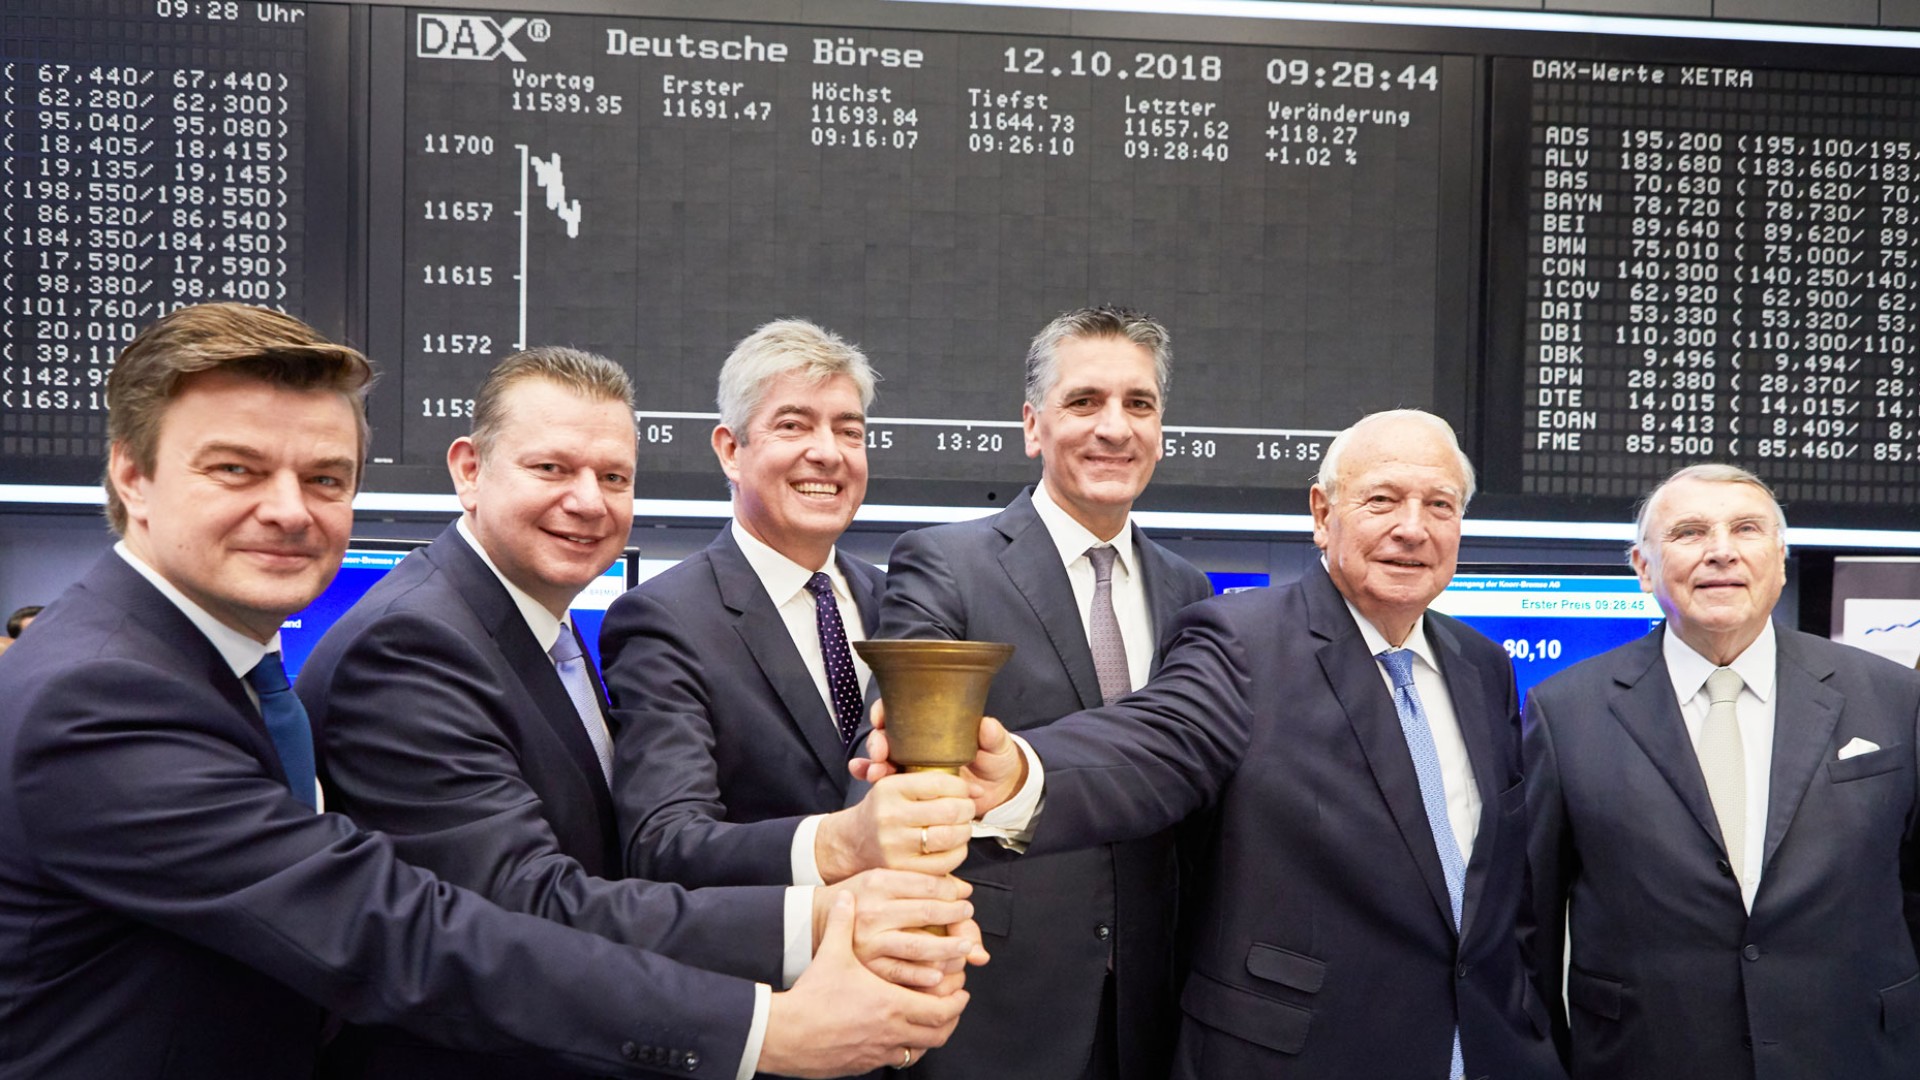 To mark the stock exchange debut, the owners, Supervisory Board and Executive Board together ring the opening bell (from left): Dr. Jürgen Wilder, Dr. Peter Laier, Ralph Heuwing, Klaus Deller, Heinz Hermann Thiele and Prof. Dr. Klaus Mangold